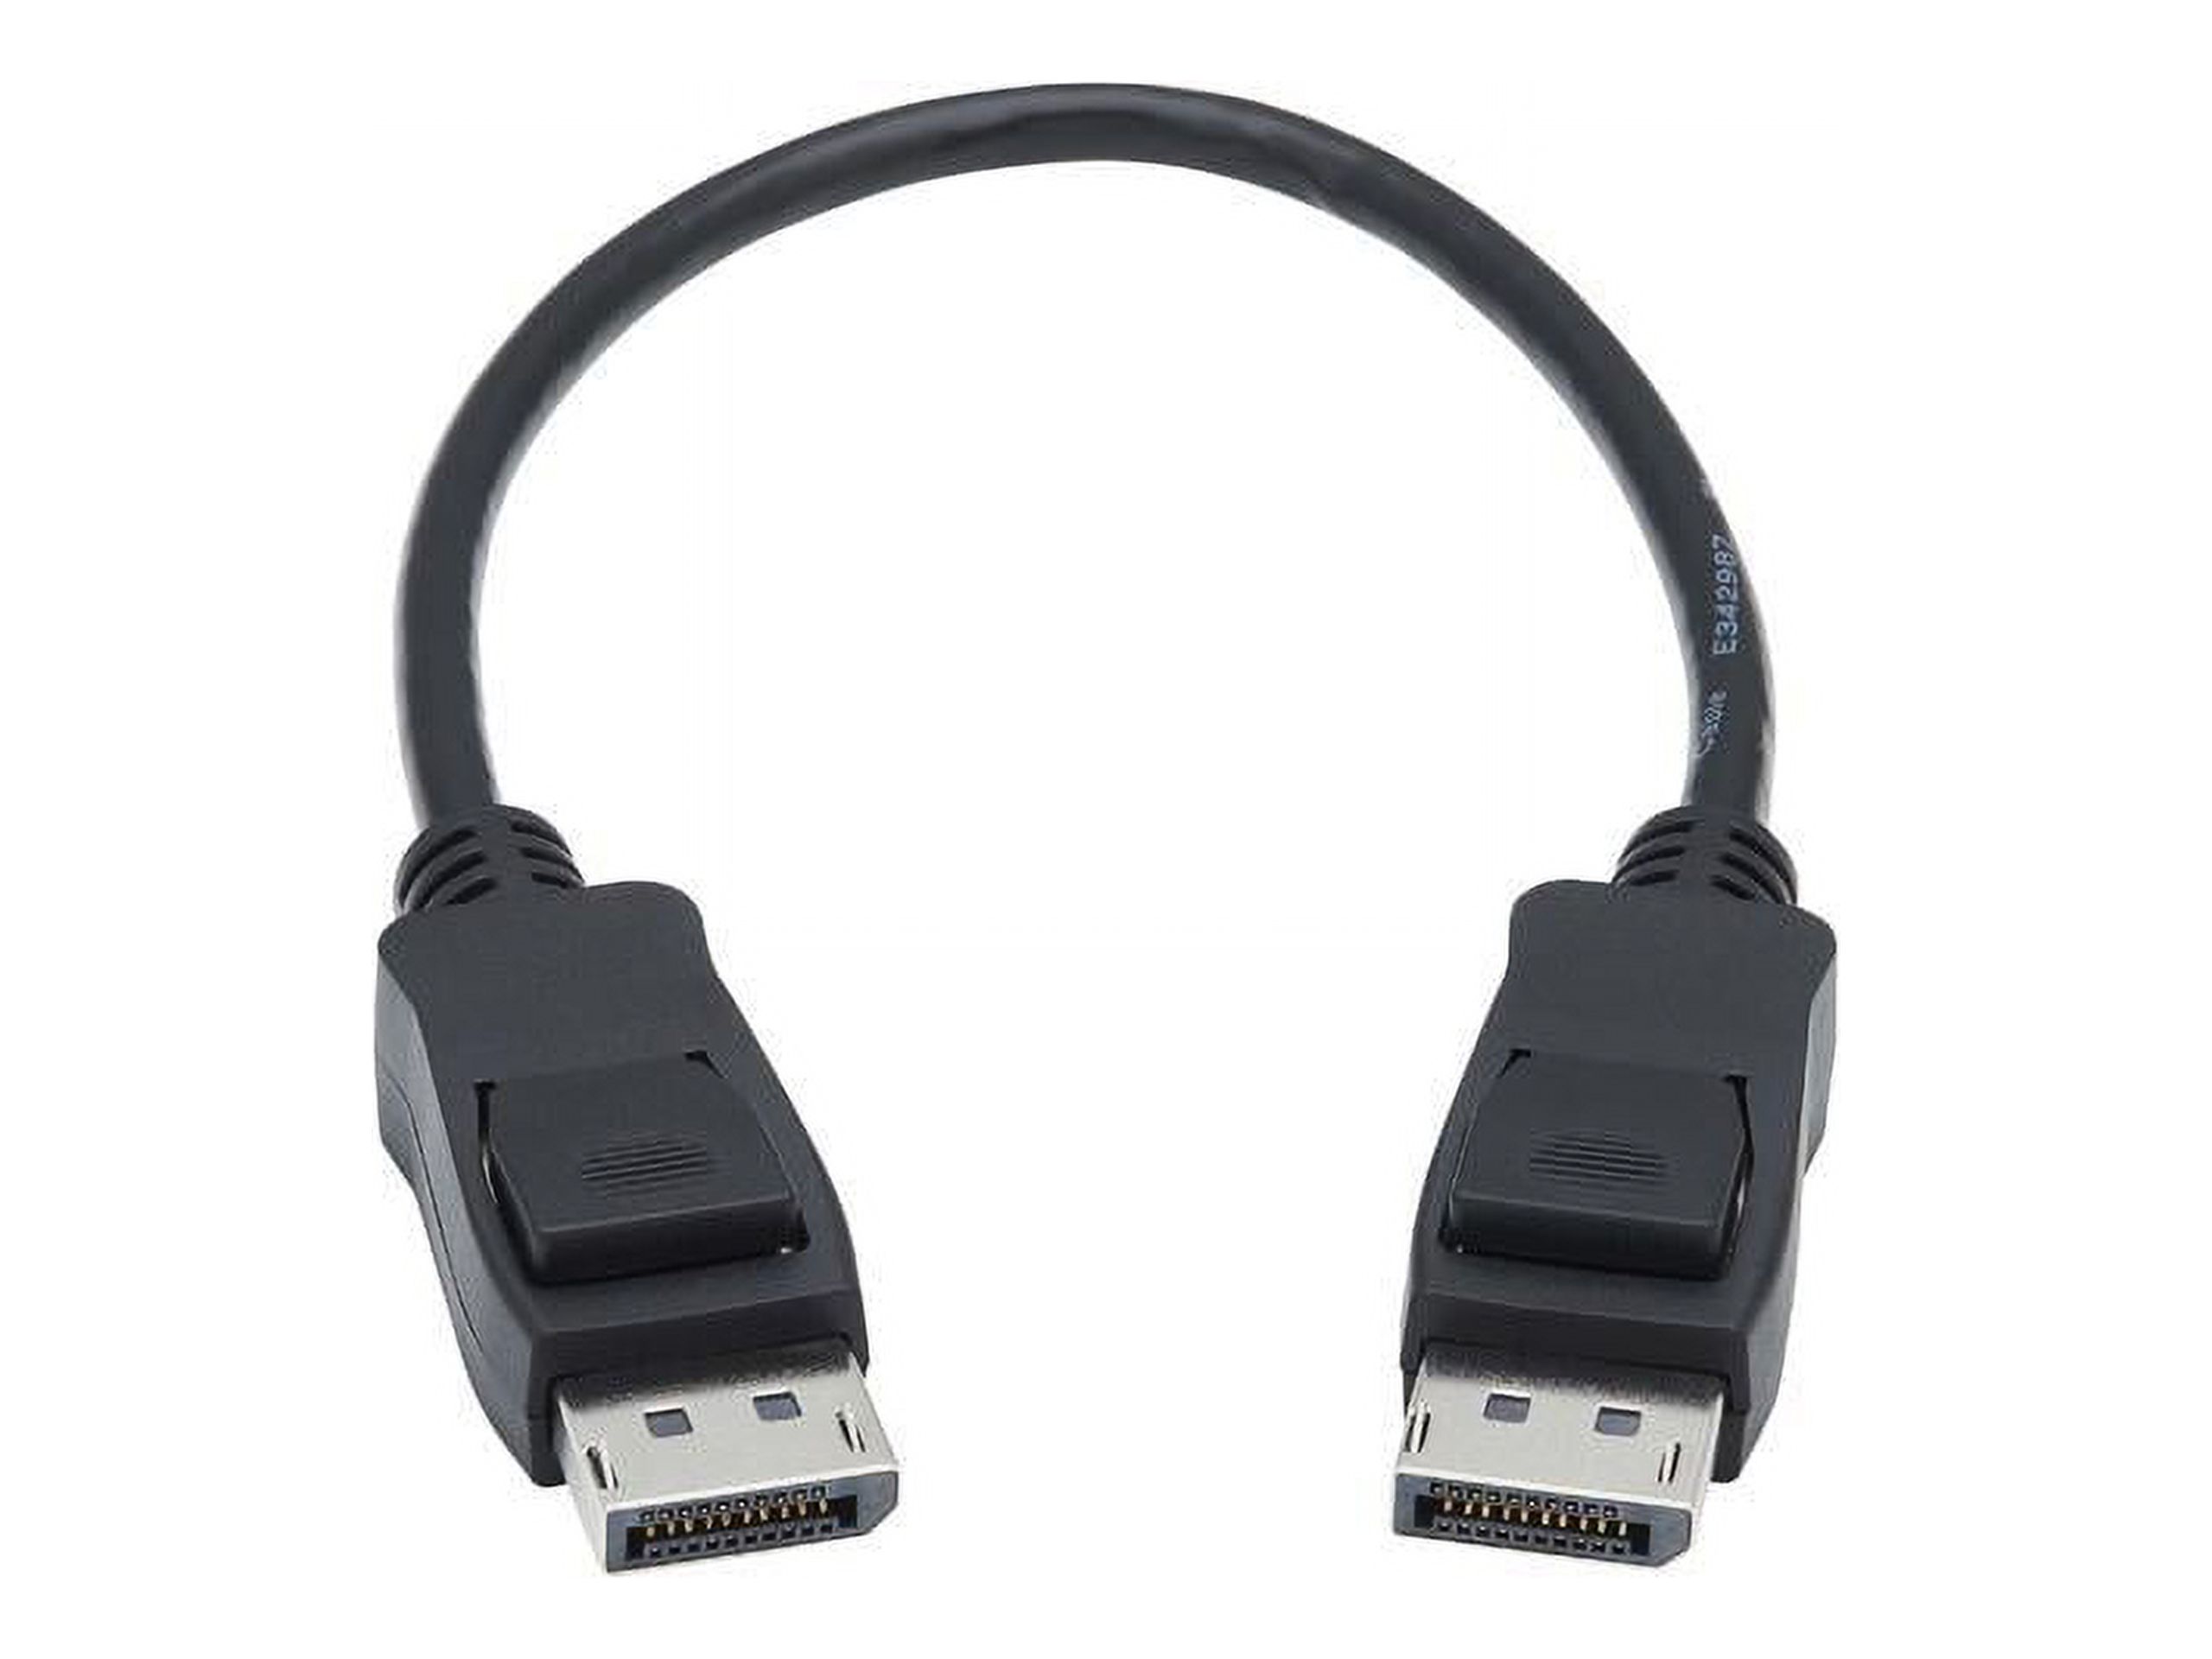 Tripp Lite P580-001-V4 1 Foot Black DisplayPort 1.4 Cable with Latching Connectors - 8K UHD, HDR, 4:2:0, HDCP 2.2, M/M, Black, 1 ft. Male to Male - image 1 of 4